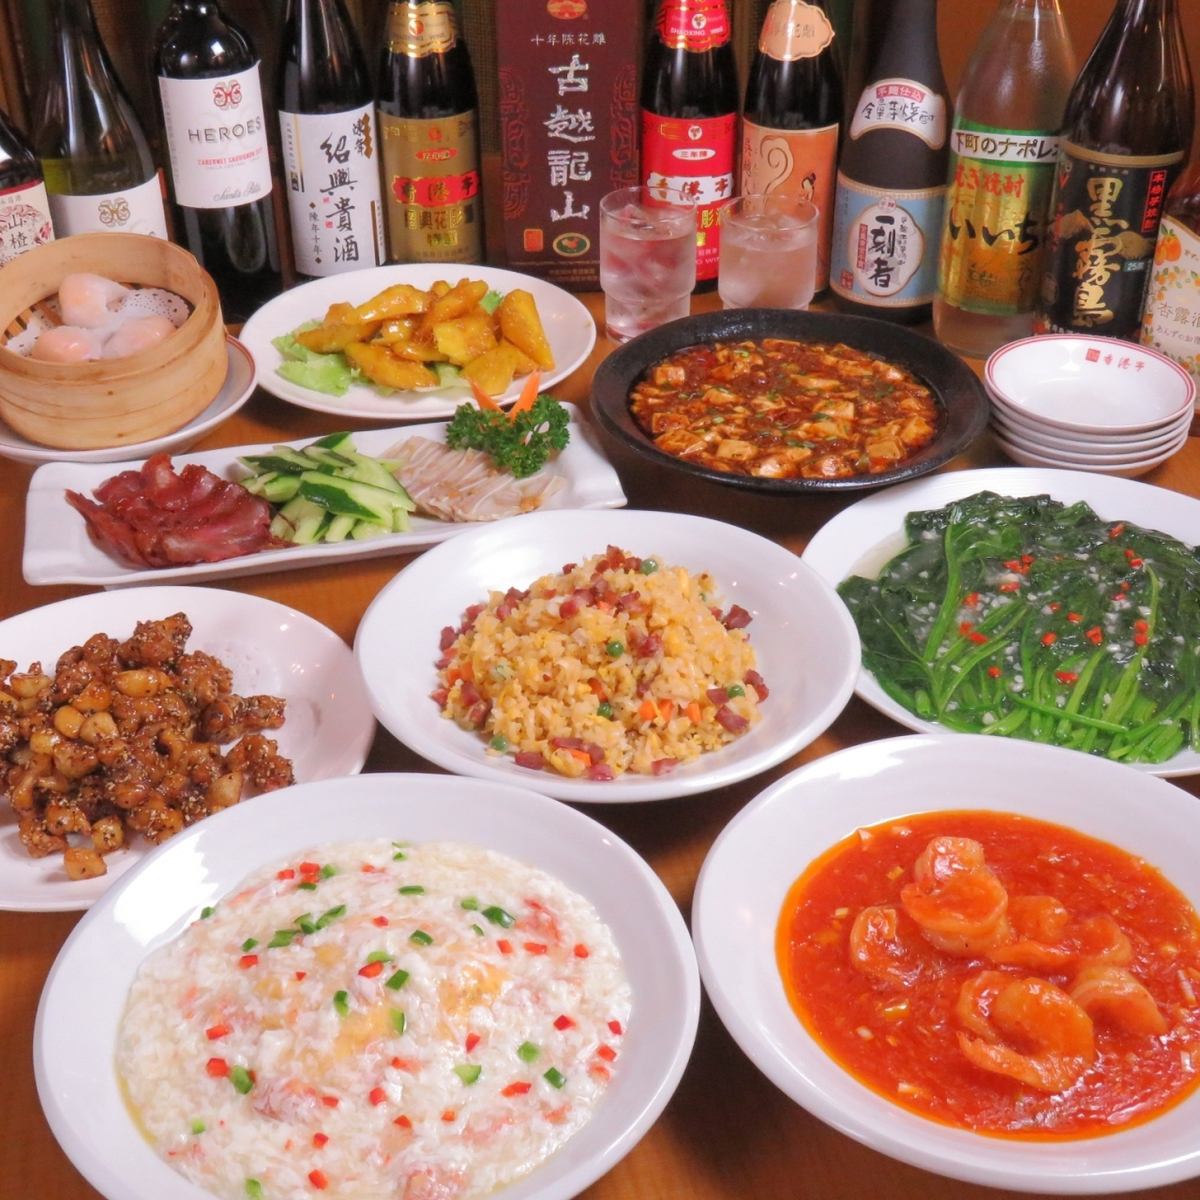 You can enjoy Chinese food such as dumplings, mapo tofu, and dumplings at a reasonable price.